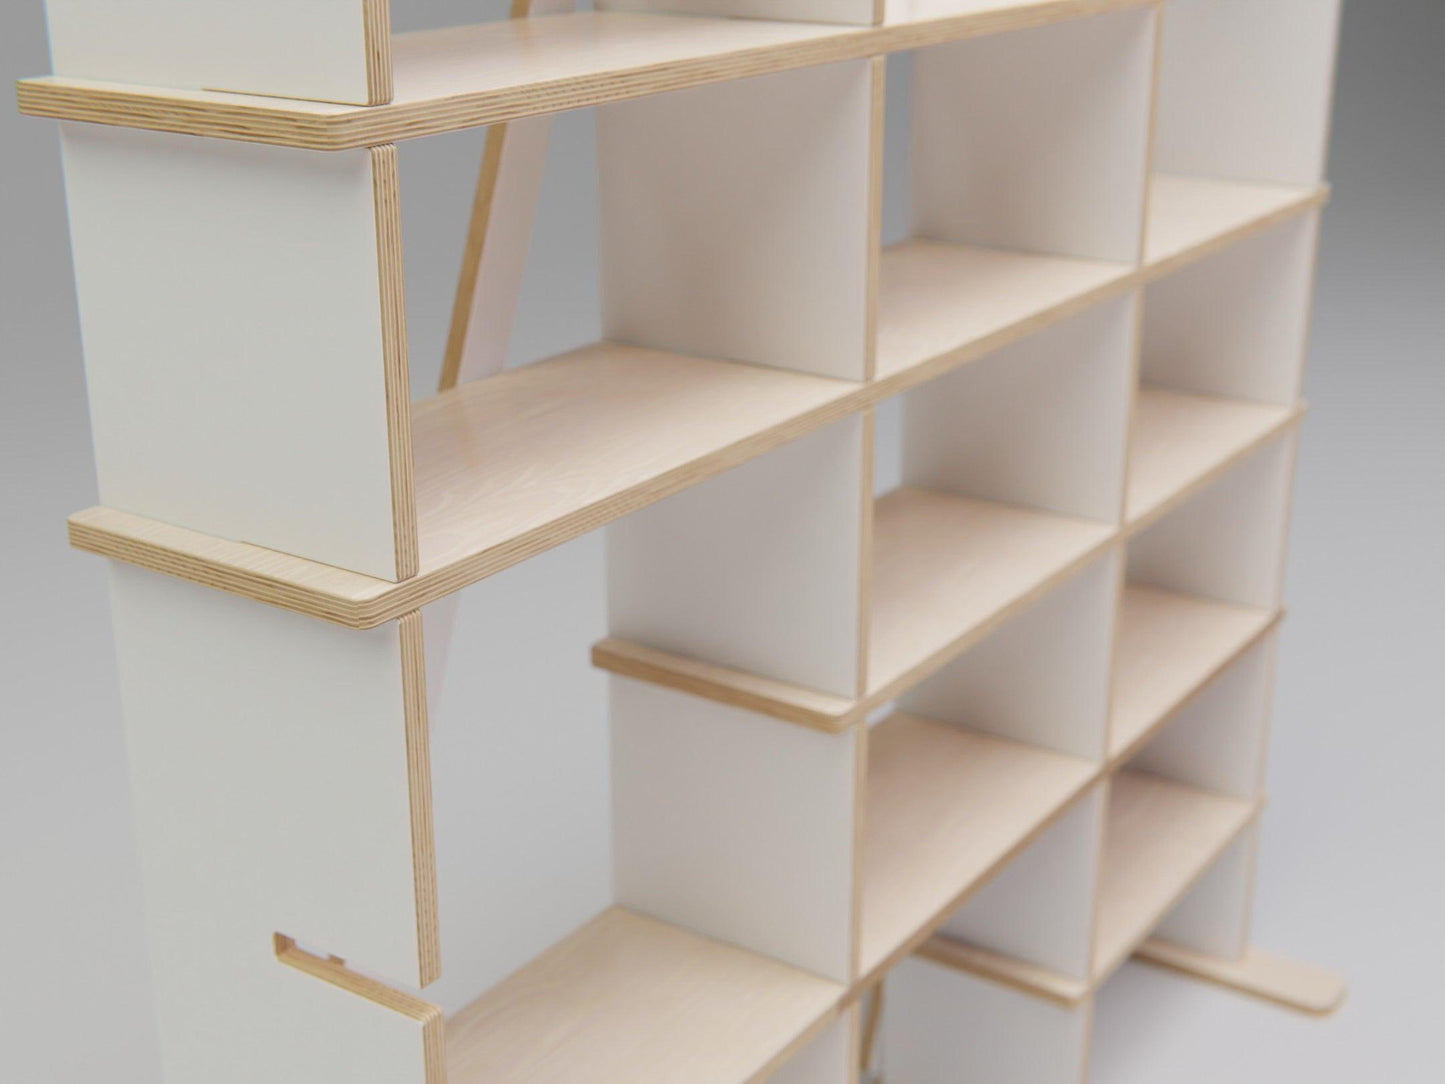 Revamp your decor with our modular bookcase. Ideal for efficient organization within our Modular Shelf Storage System in white.